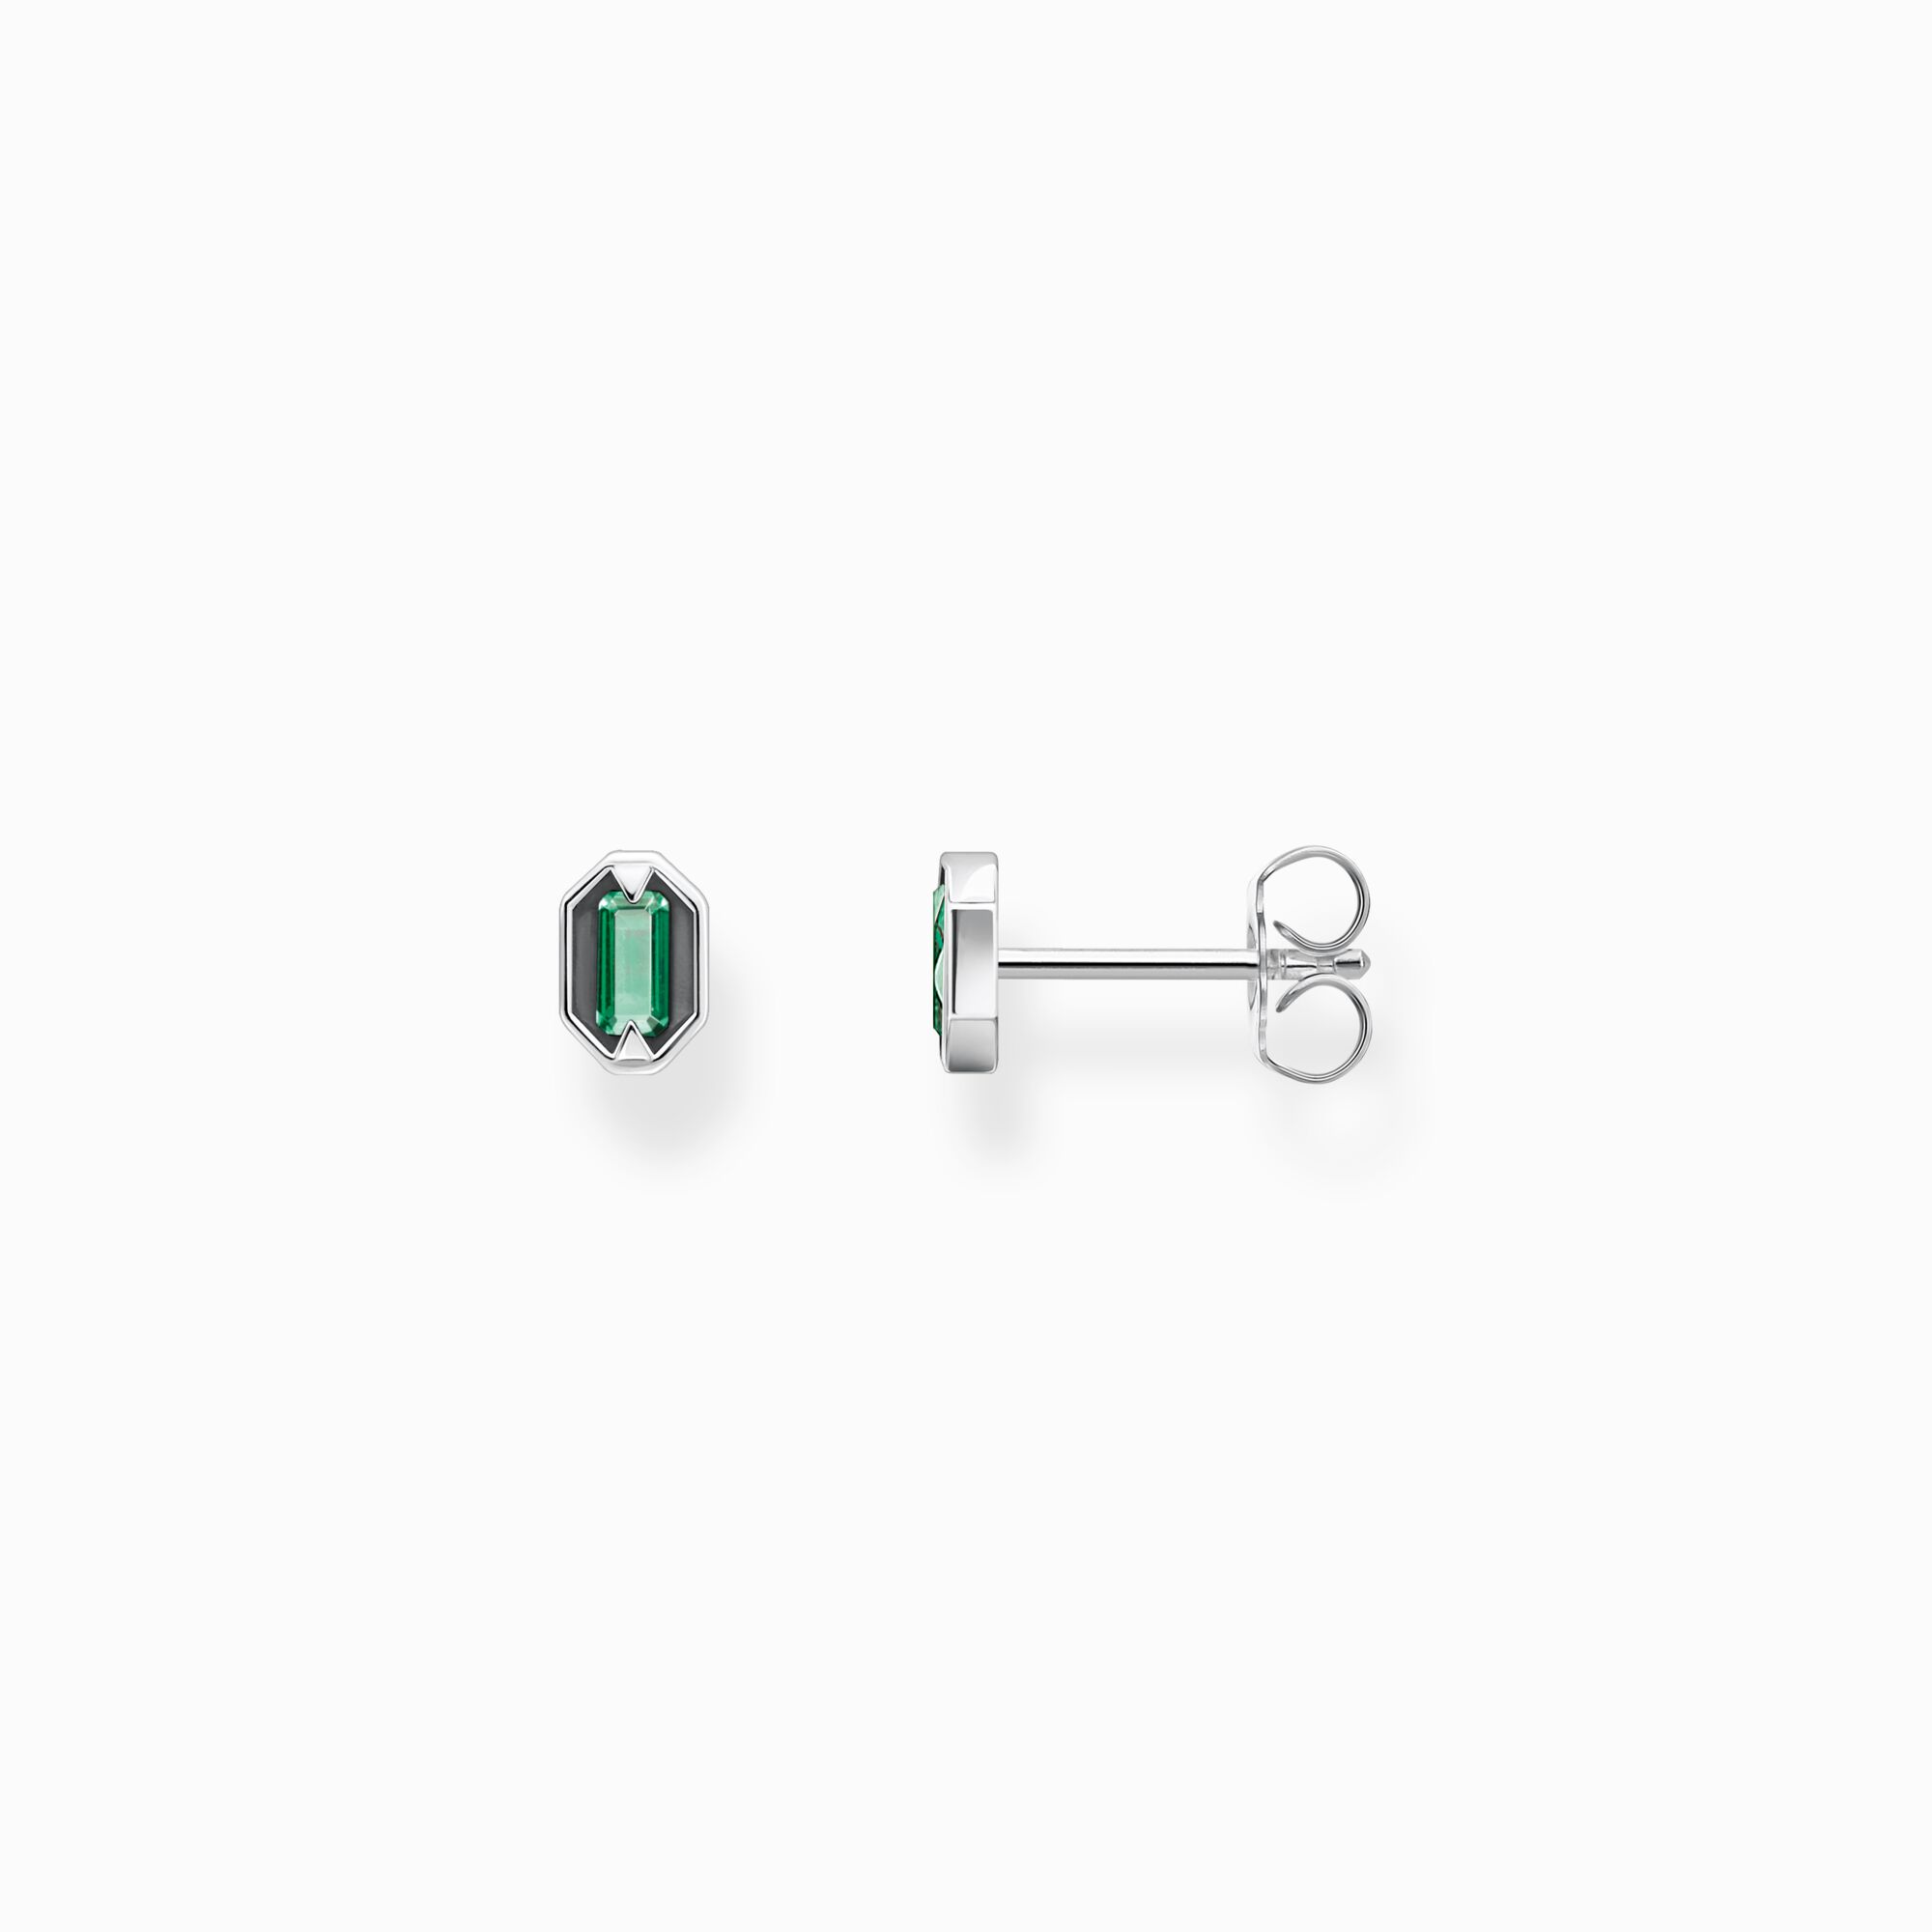 Blackened silver ear studs with crocodile eyes and green stones from the  collection in the THOMAS SABO online store